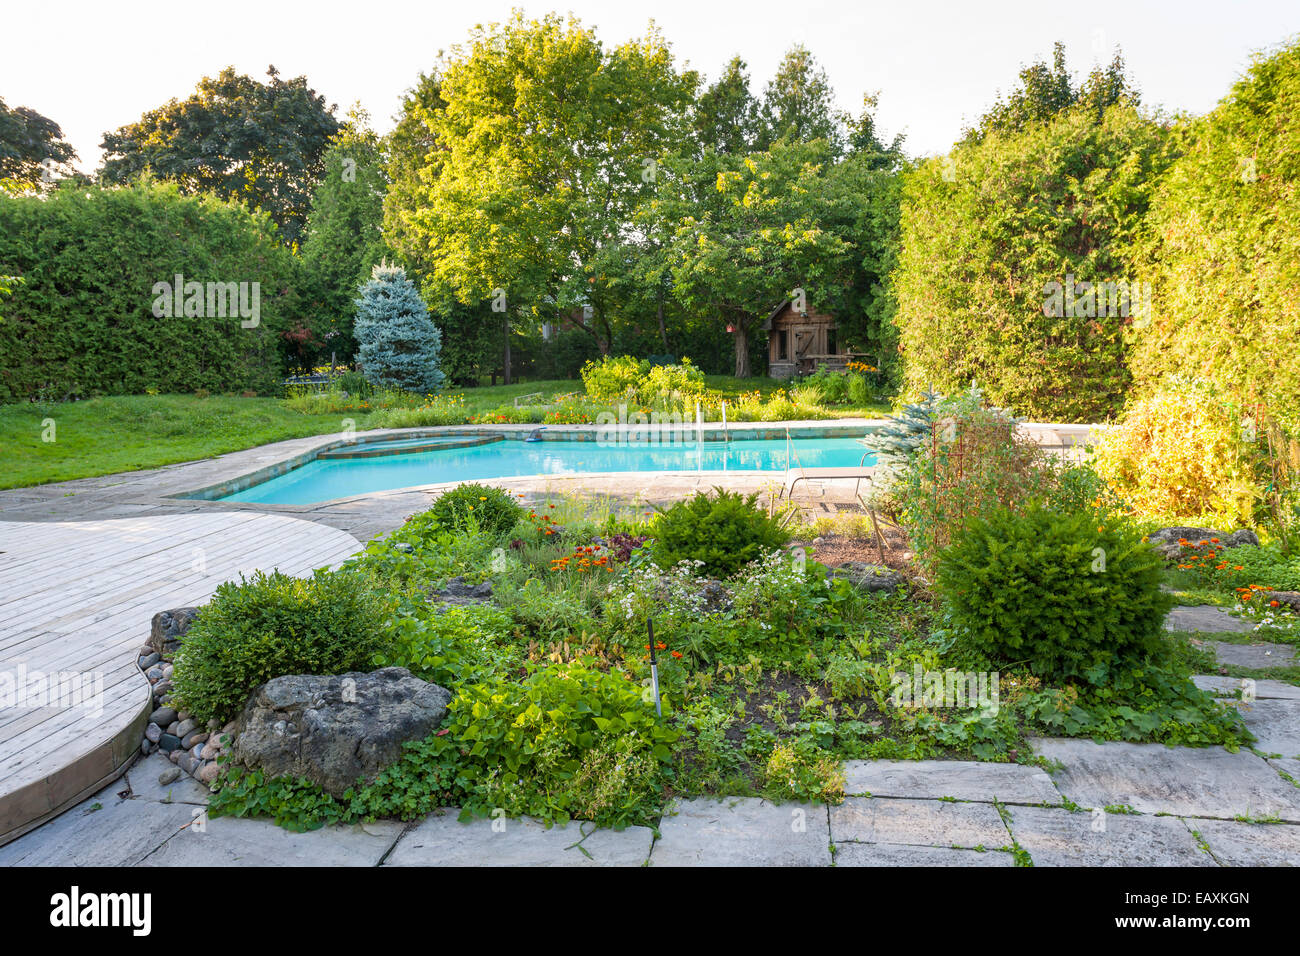 Backyard rock garden with outdoor inground residential private swimming pool and stone patio Stock Photo